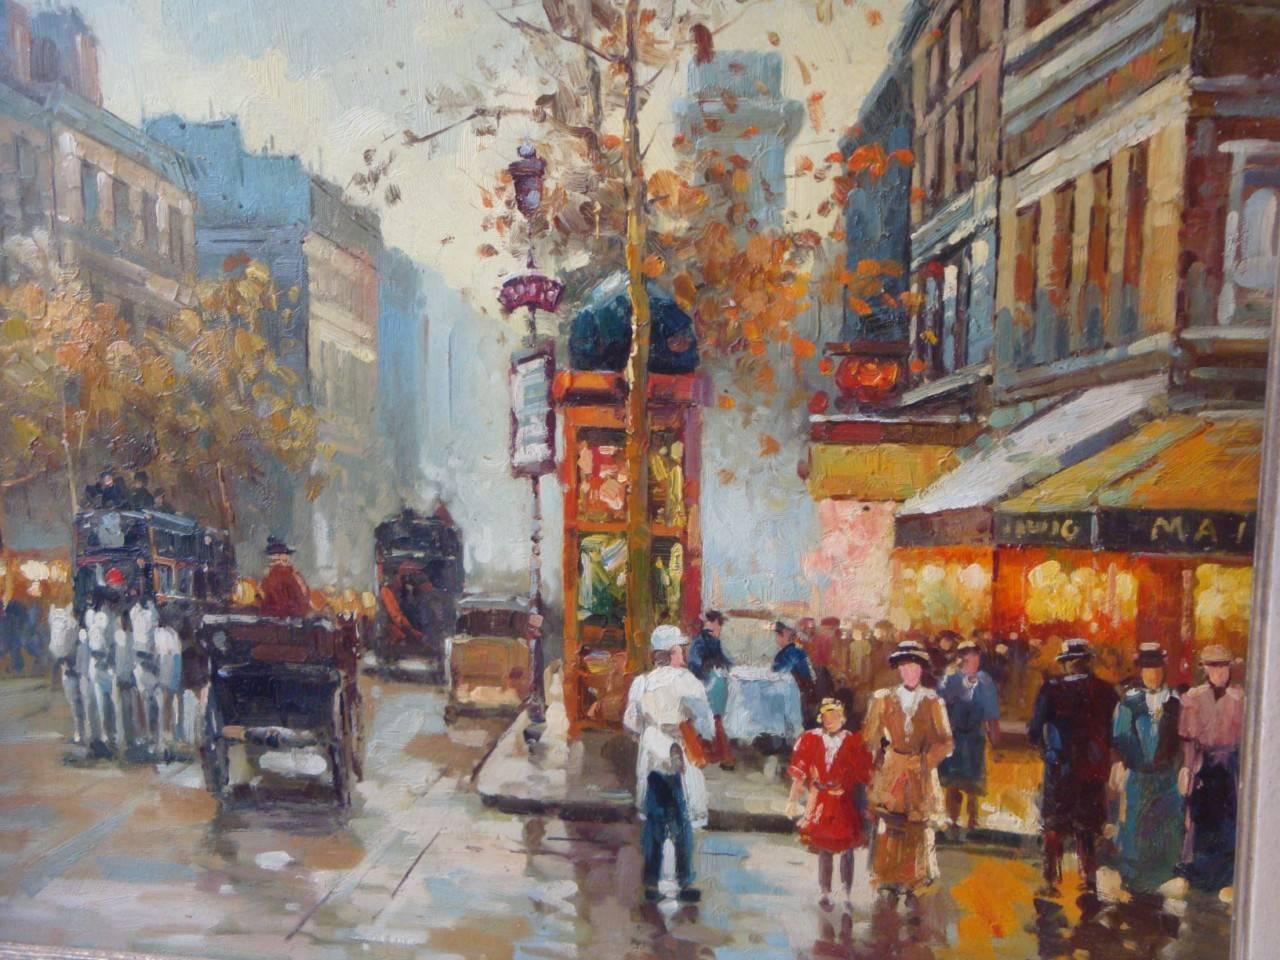 A rare original oil on wood painting taken from an exclusive collection by Artist Rambert(French). Painting showcases a Magnificent Paris Street Scene with horsedrawn coaches and buggies and people walking in the streets. Signed R Rambert. It is